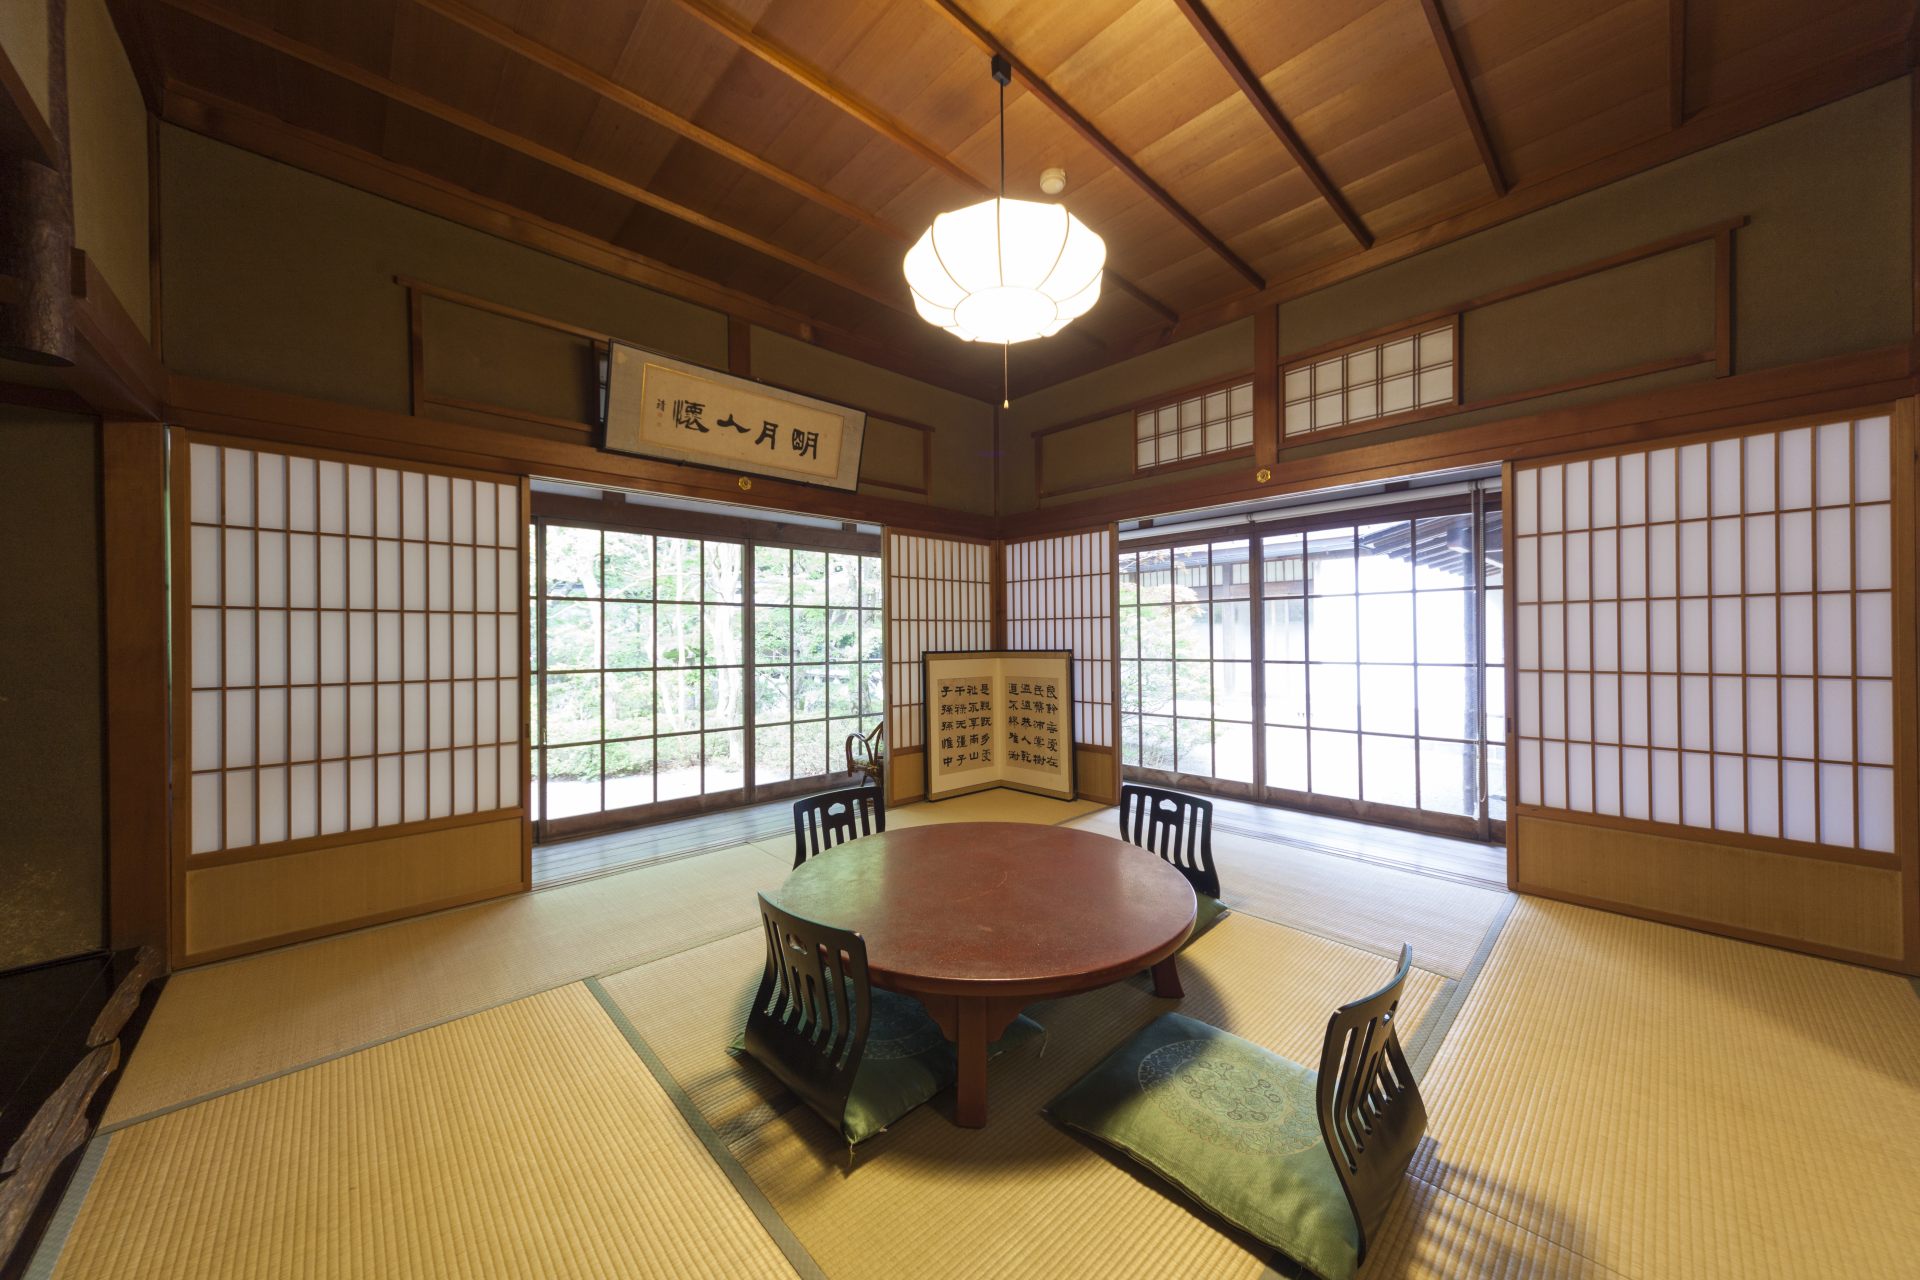 One example of the guest rooms. Find yourself enwrapped in traditional Japanese charm.